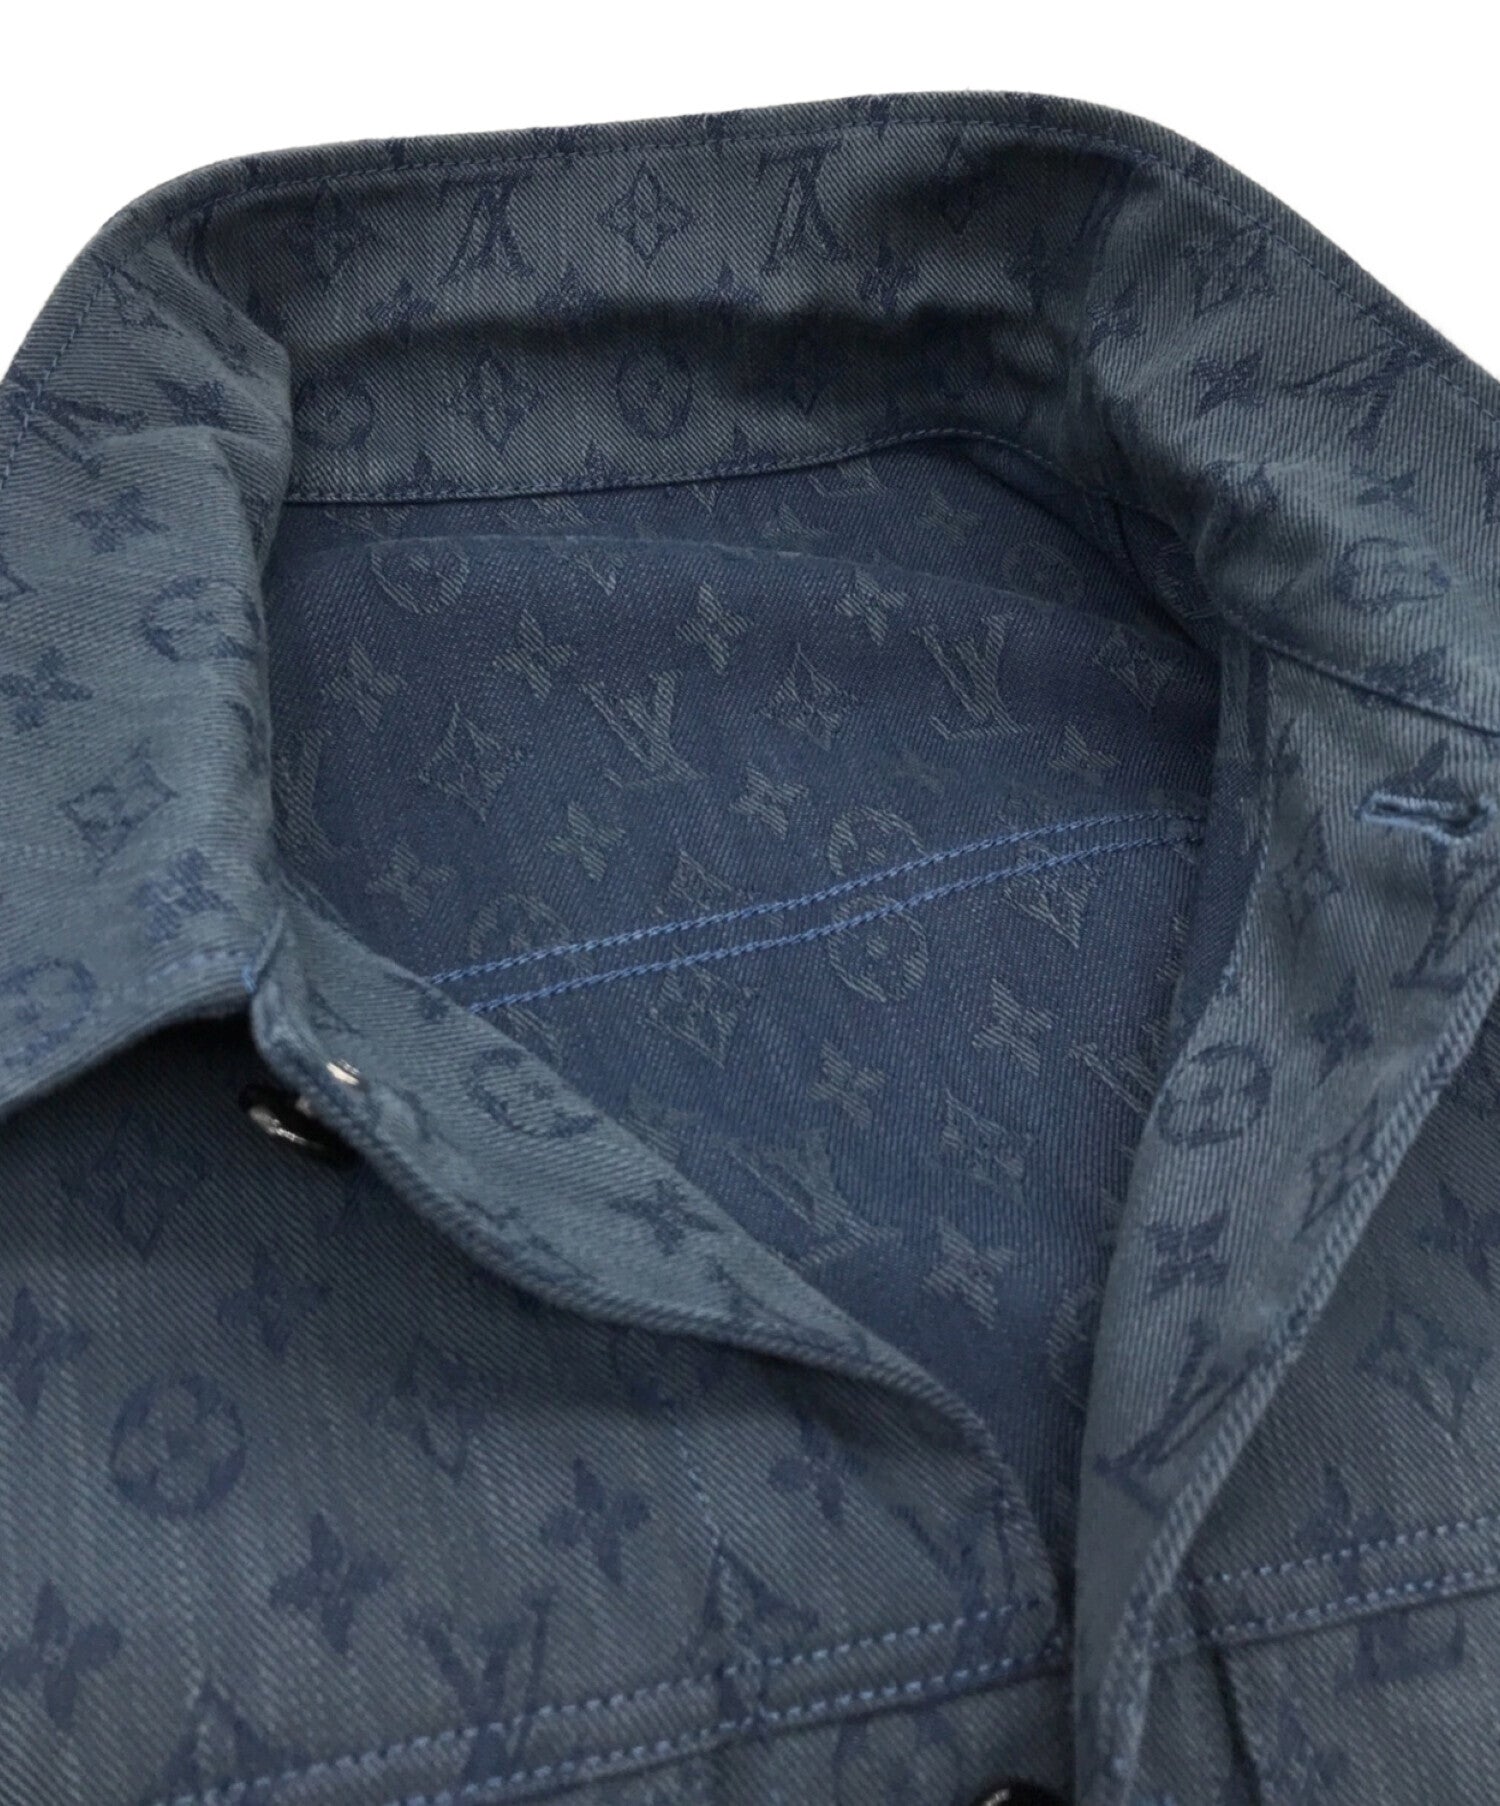 Louis Vuitton Monogram Denim Jacket !!! (review and w2c in the